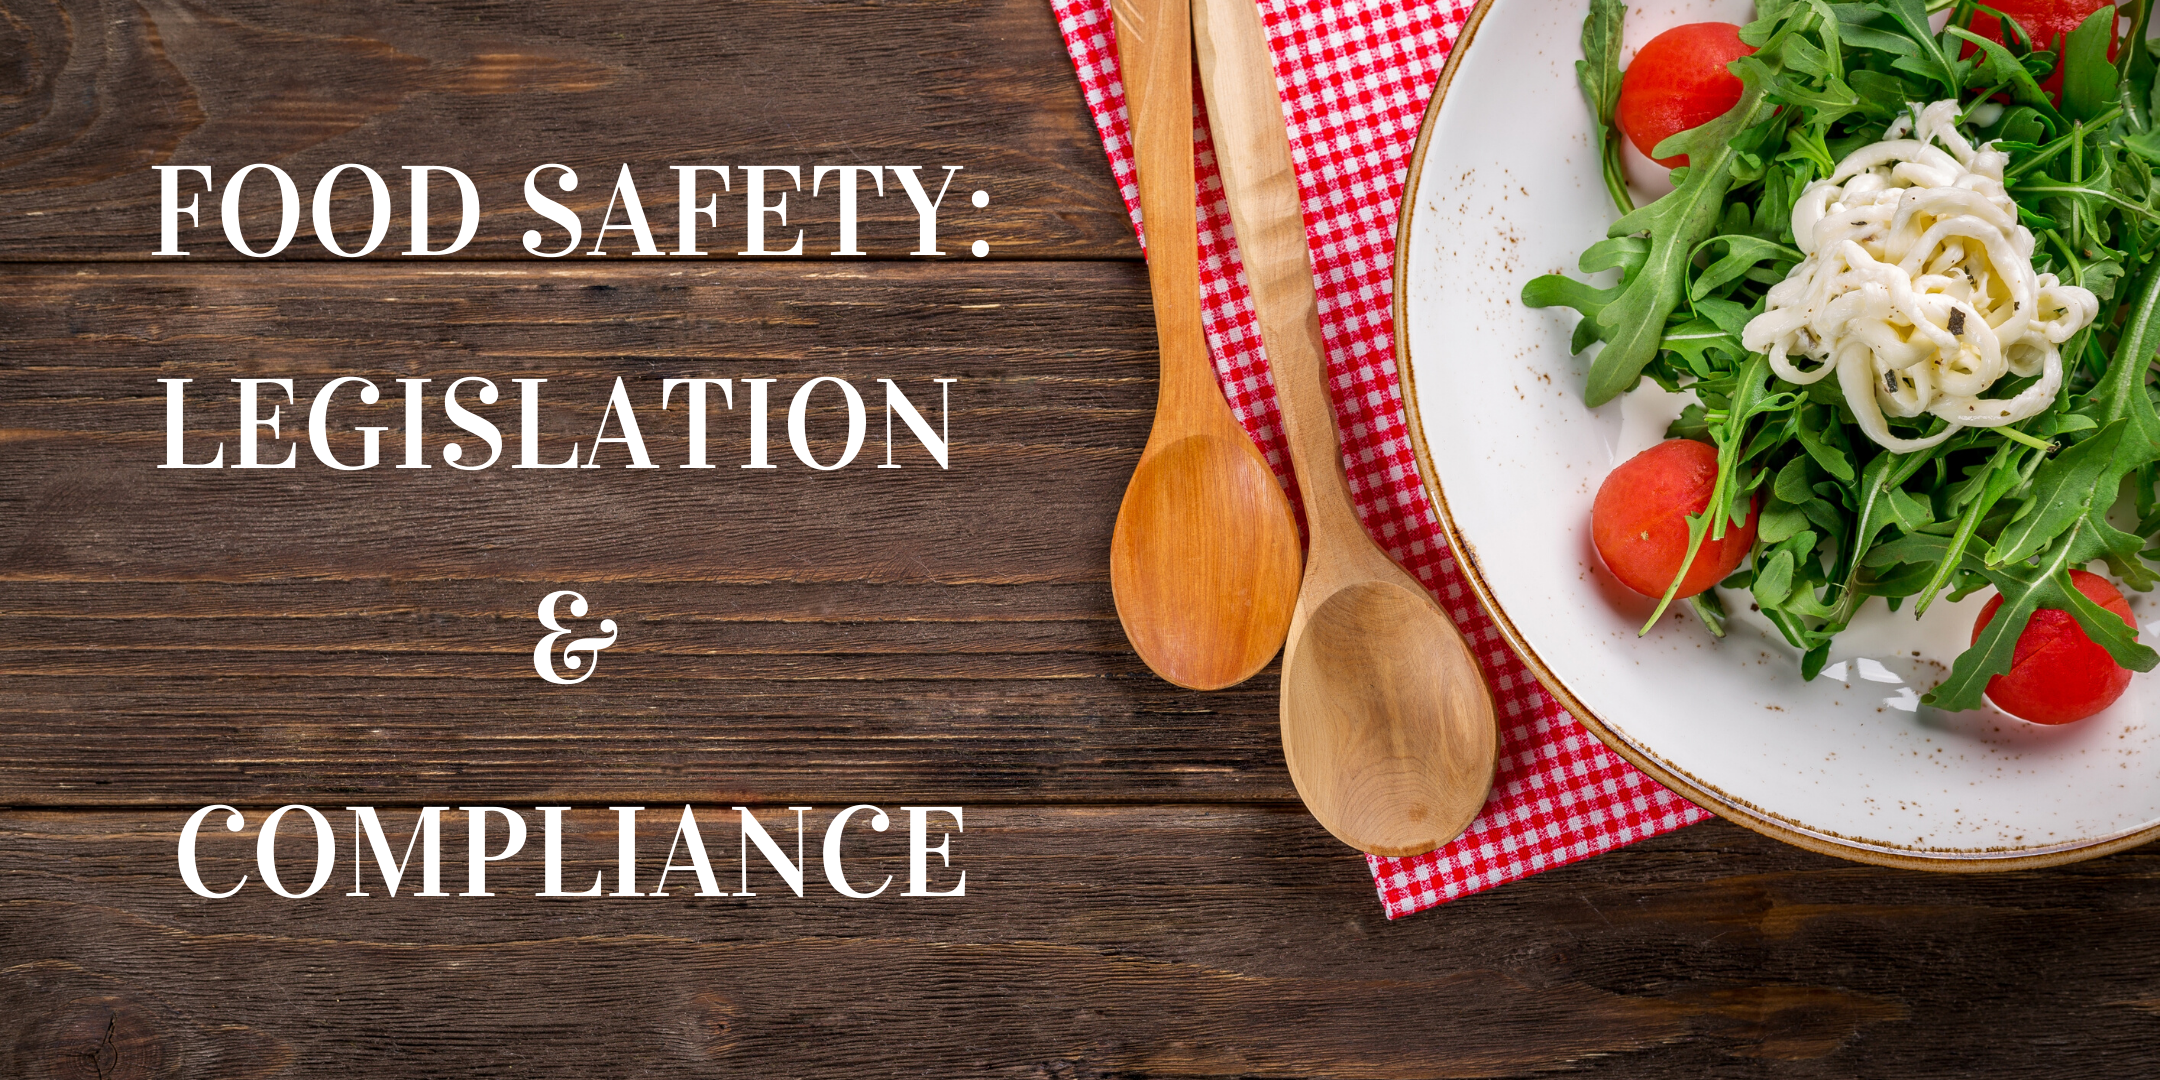 Food Safety - Legislation and Compliance